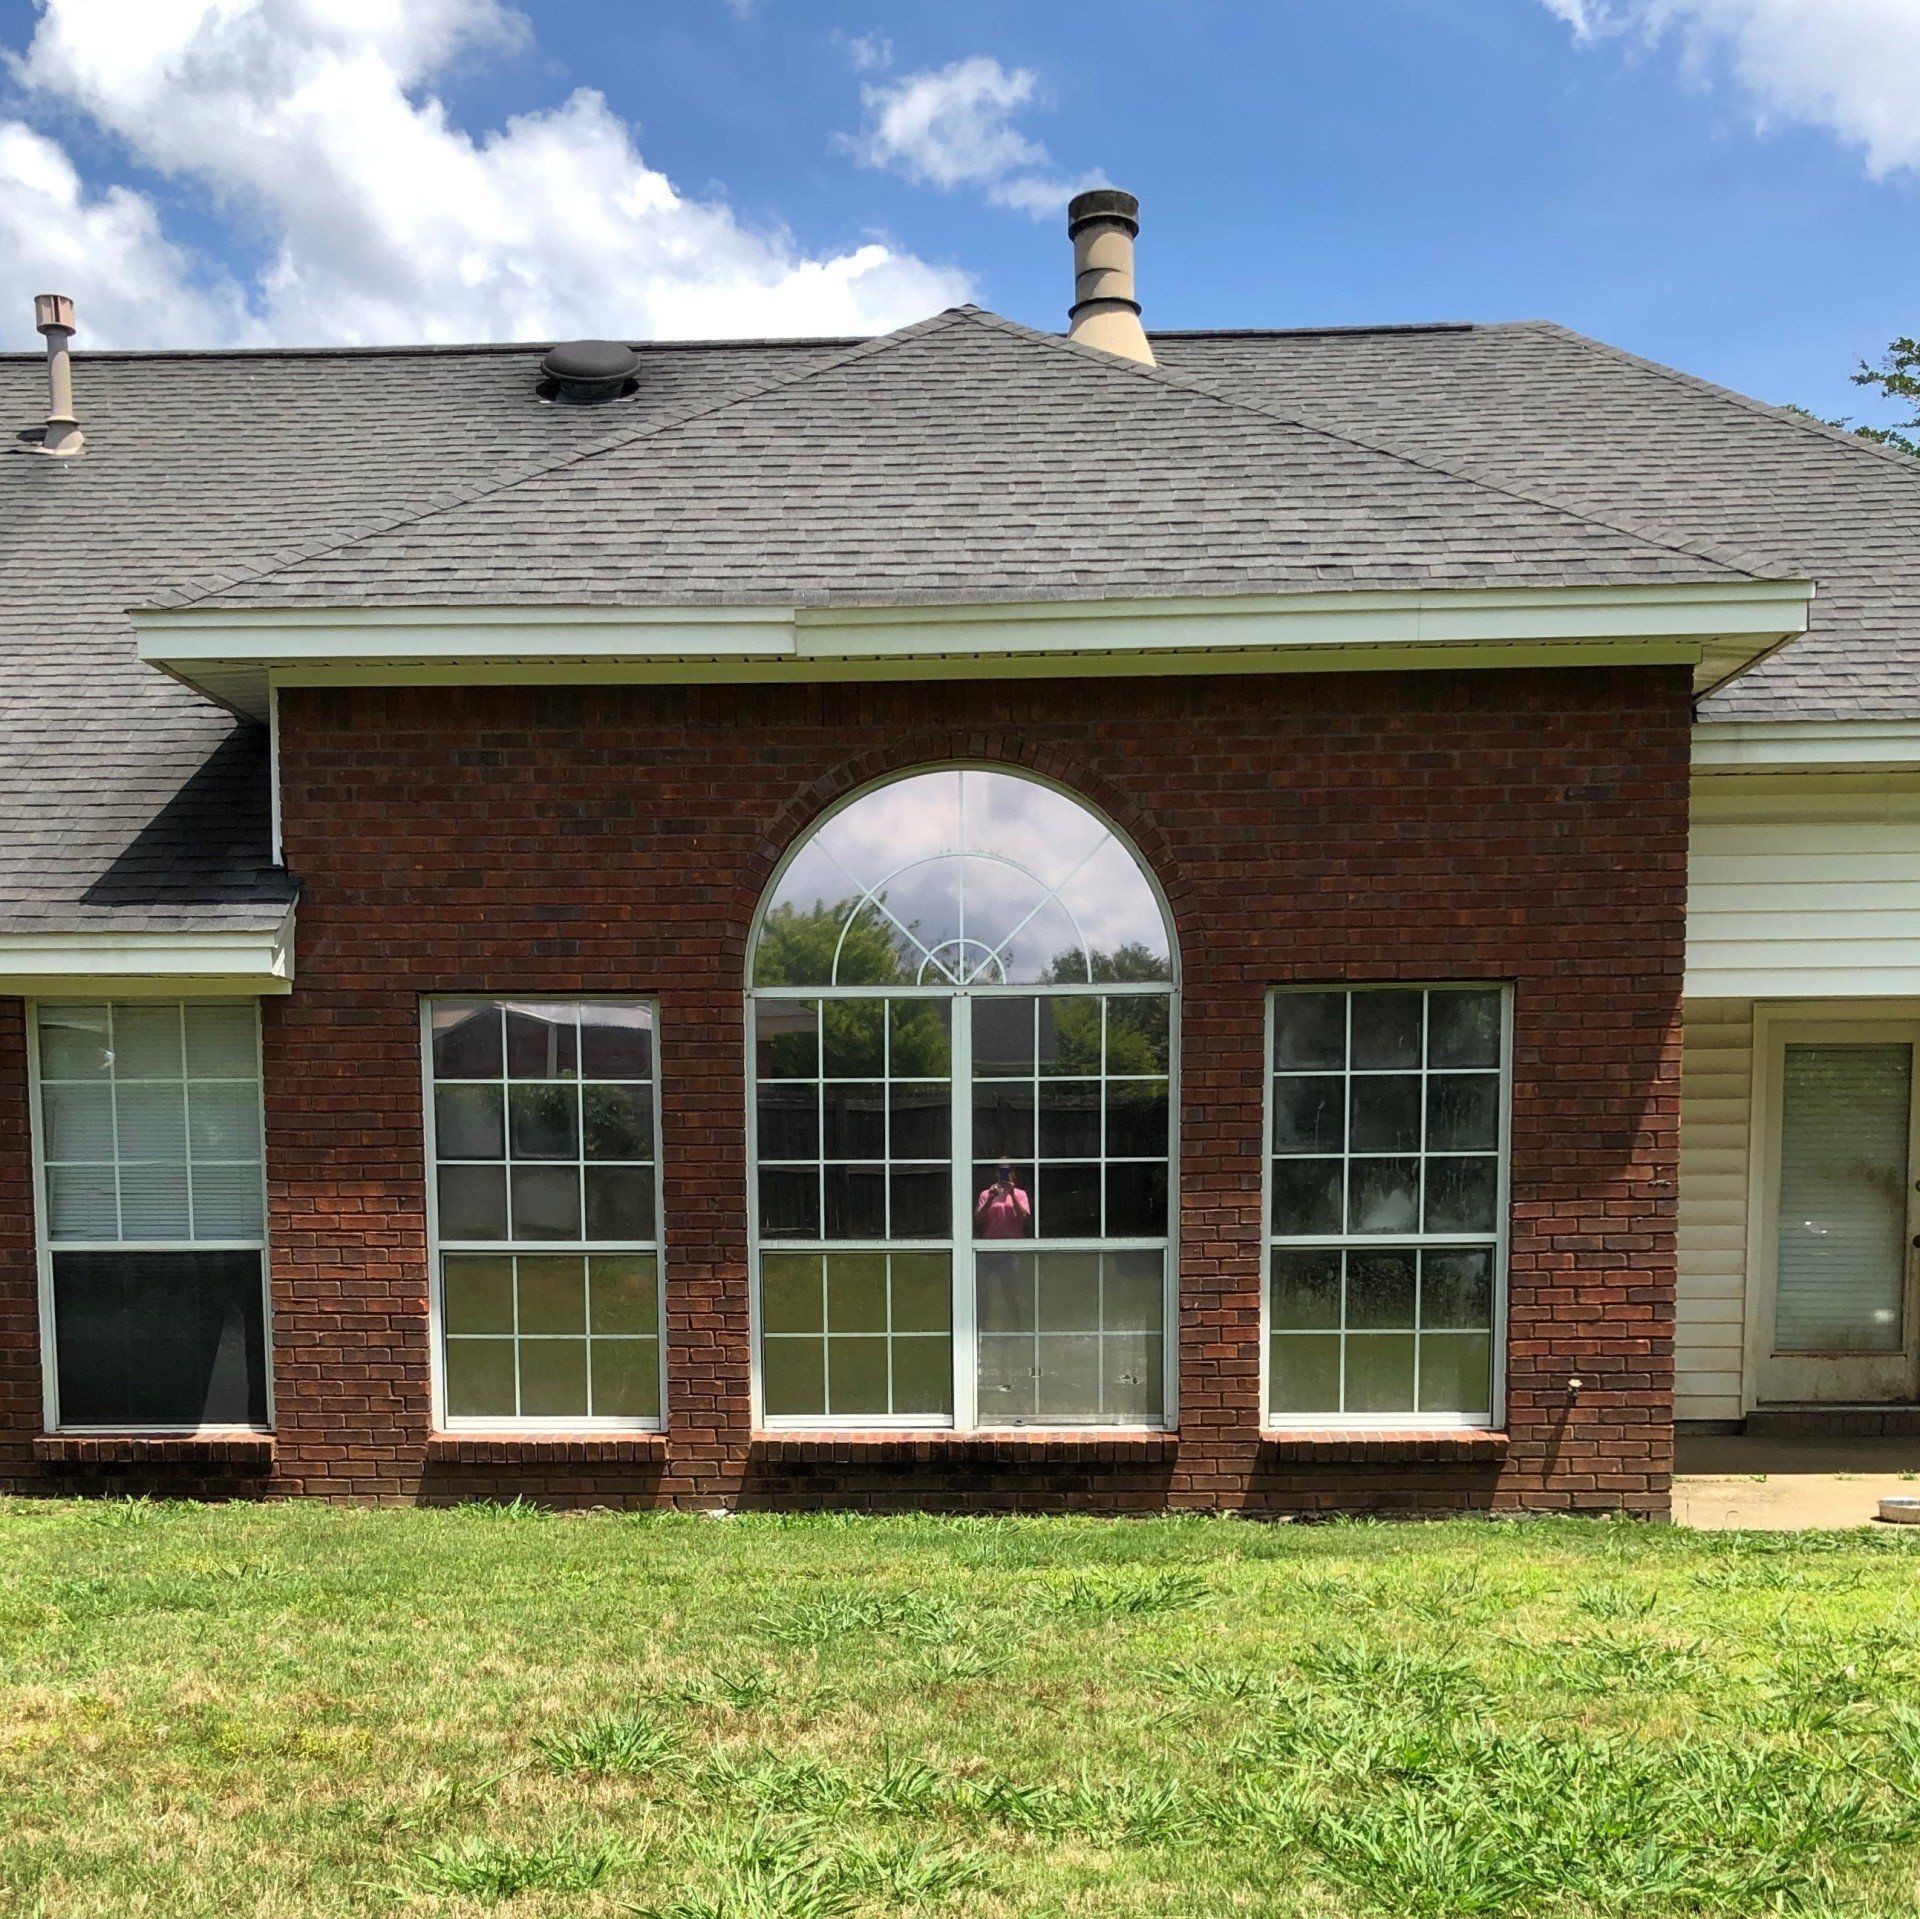 Residential tinting service in Alabama - Home tint installed in the Summer of 2019